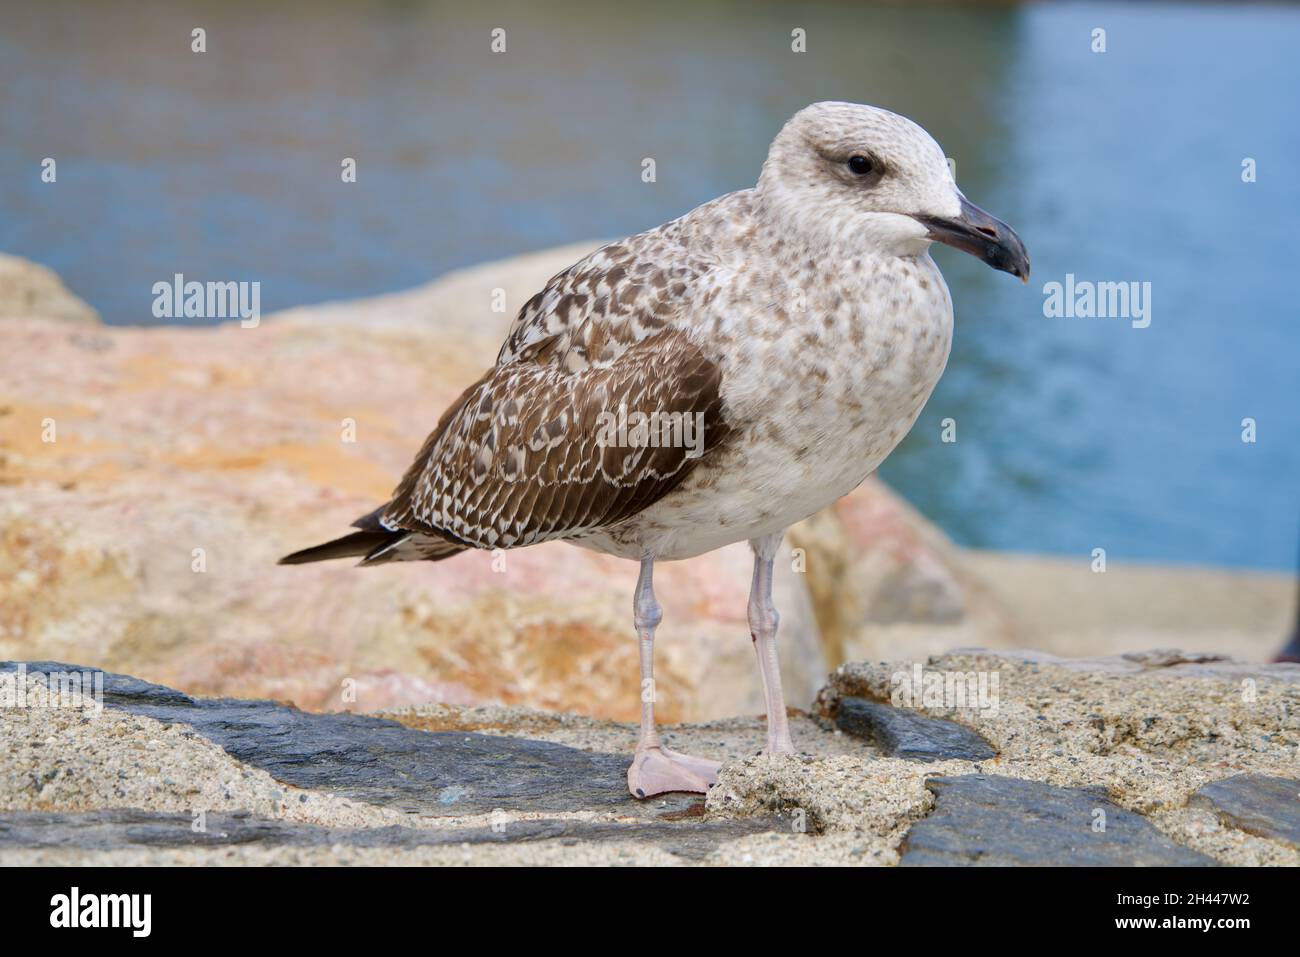 Young seagull standing on a wall Stock Photo